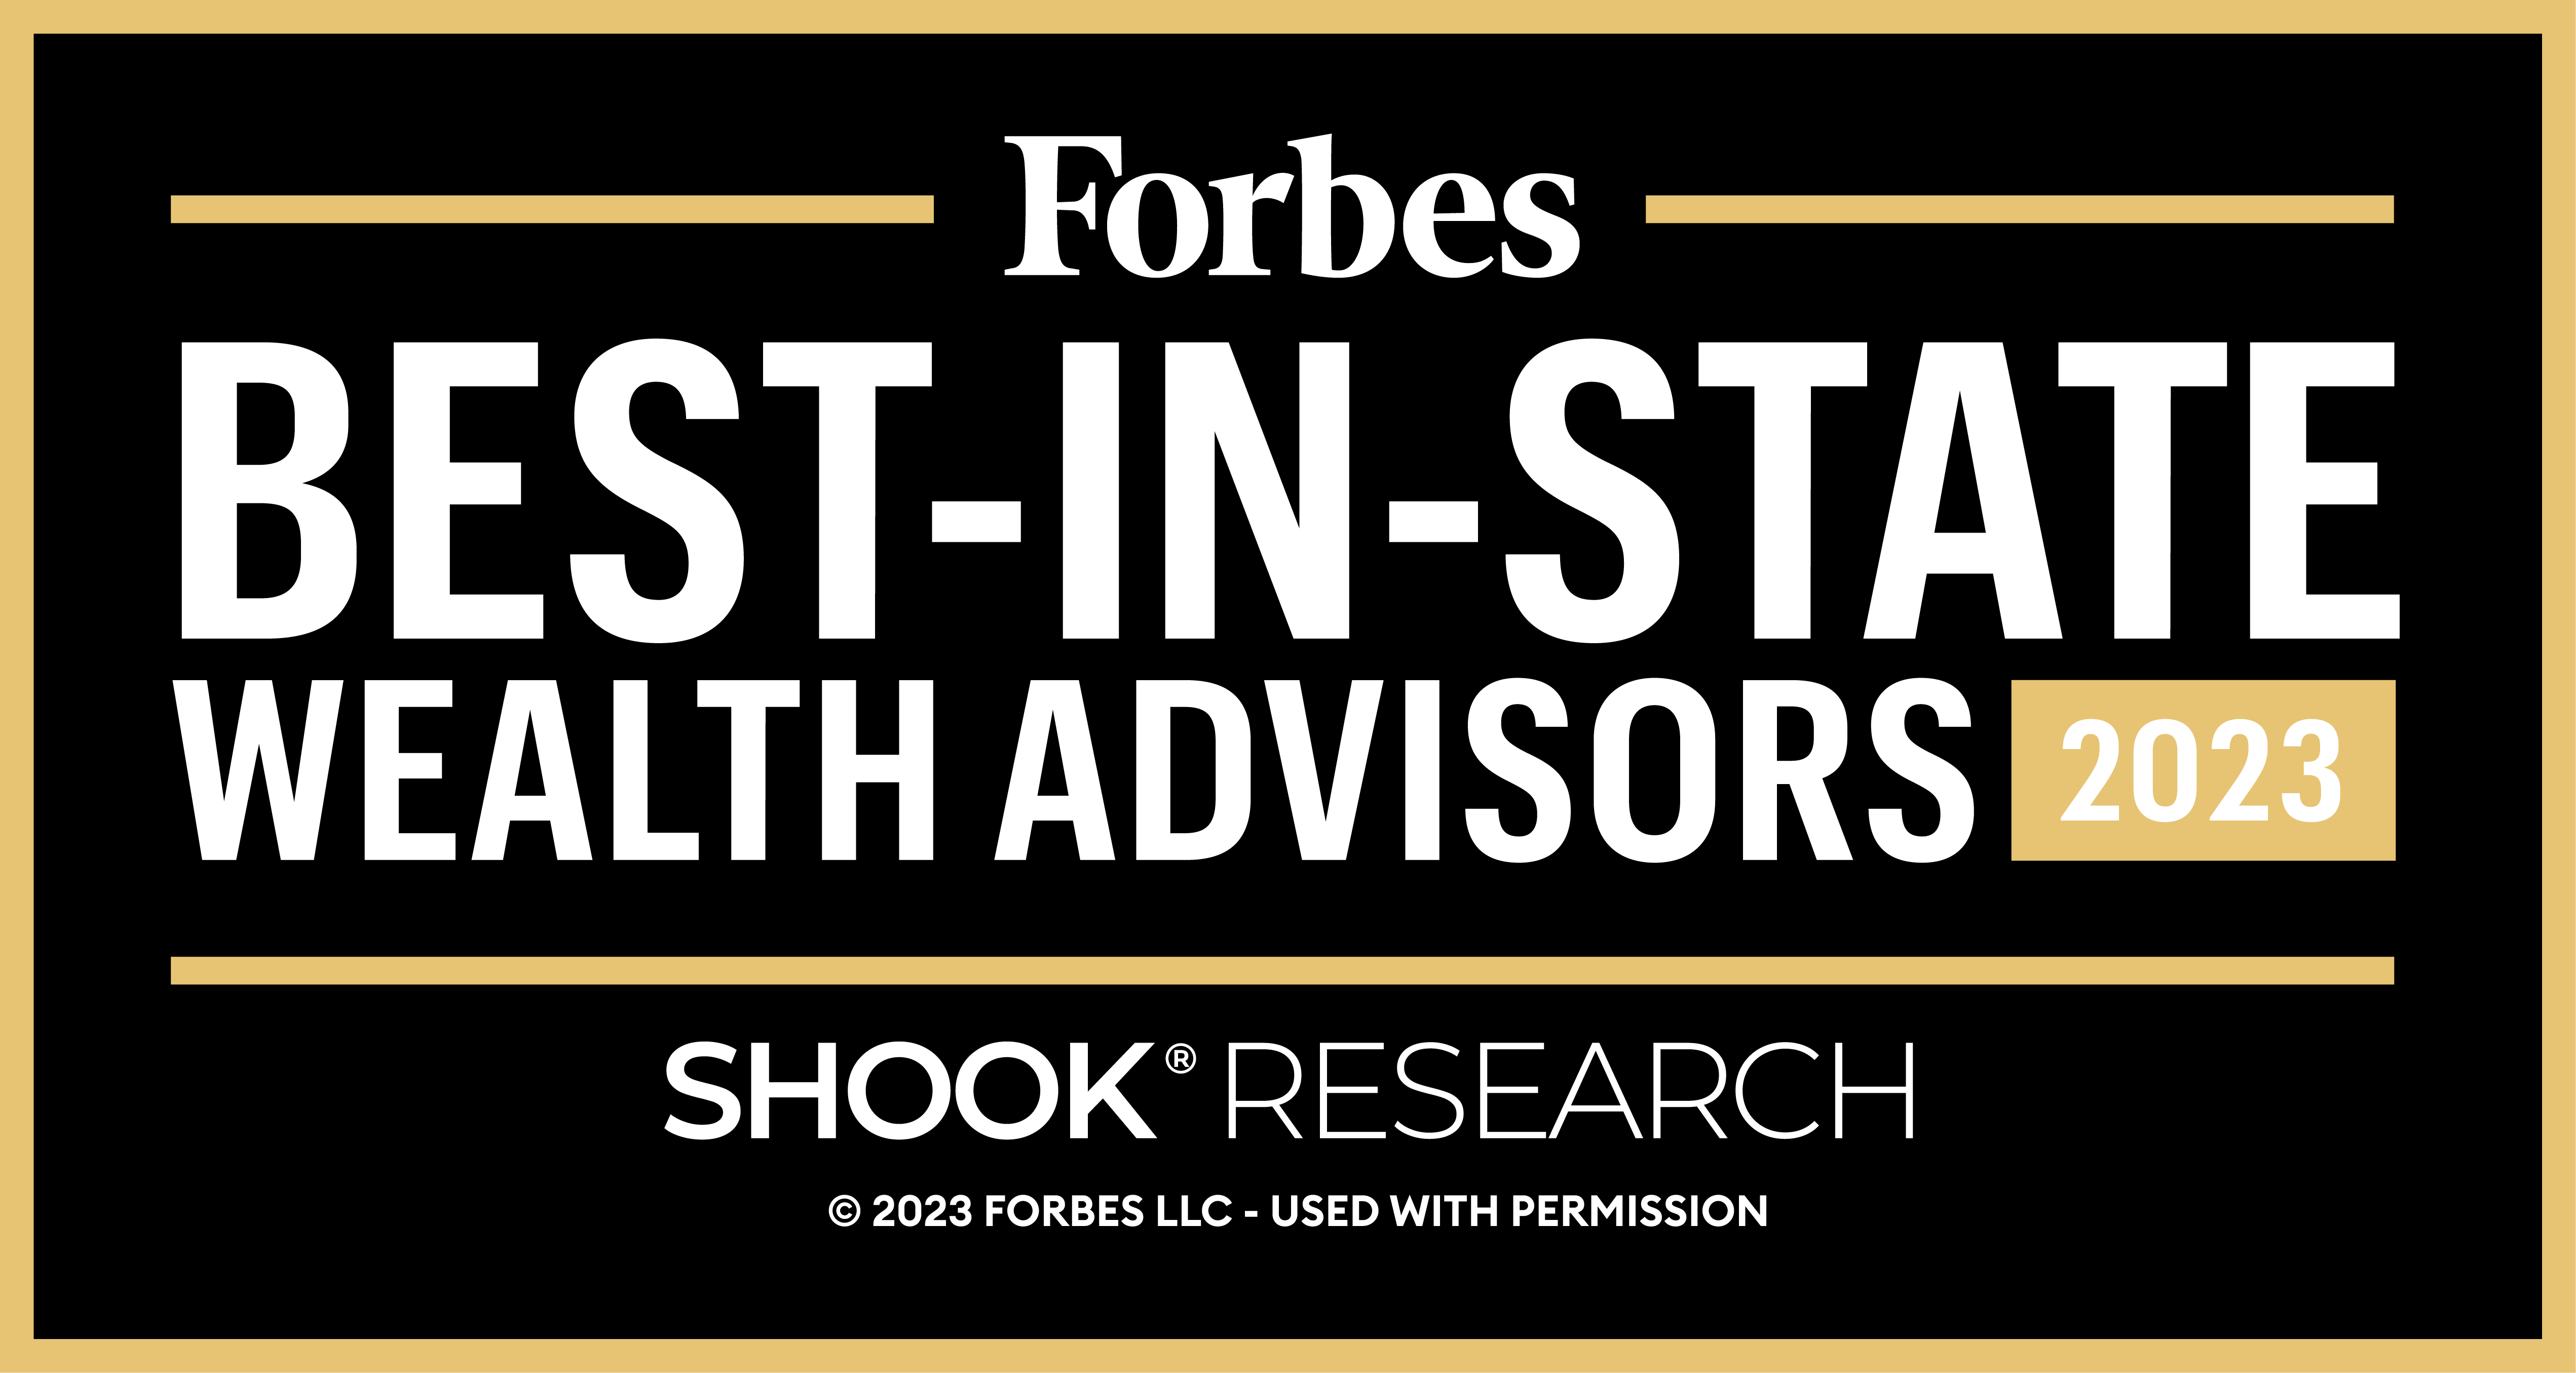 Forbes Best-In-State Wealth Advisors 2023 logo